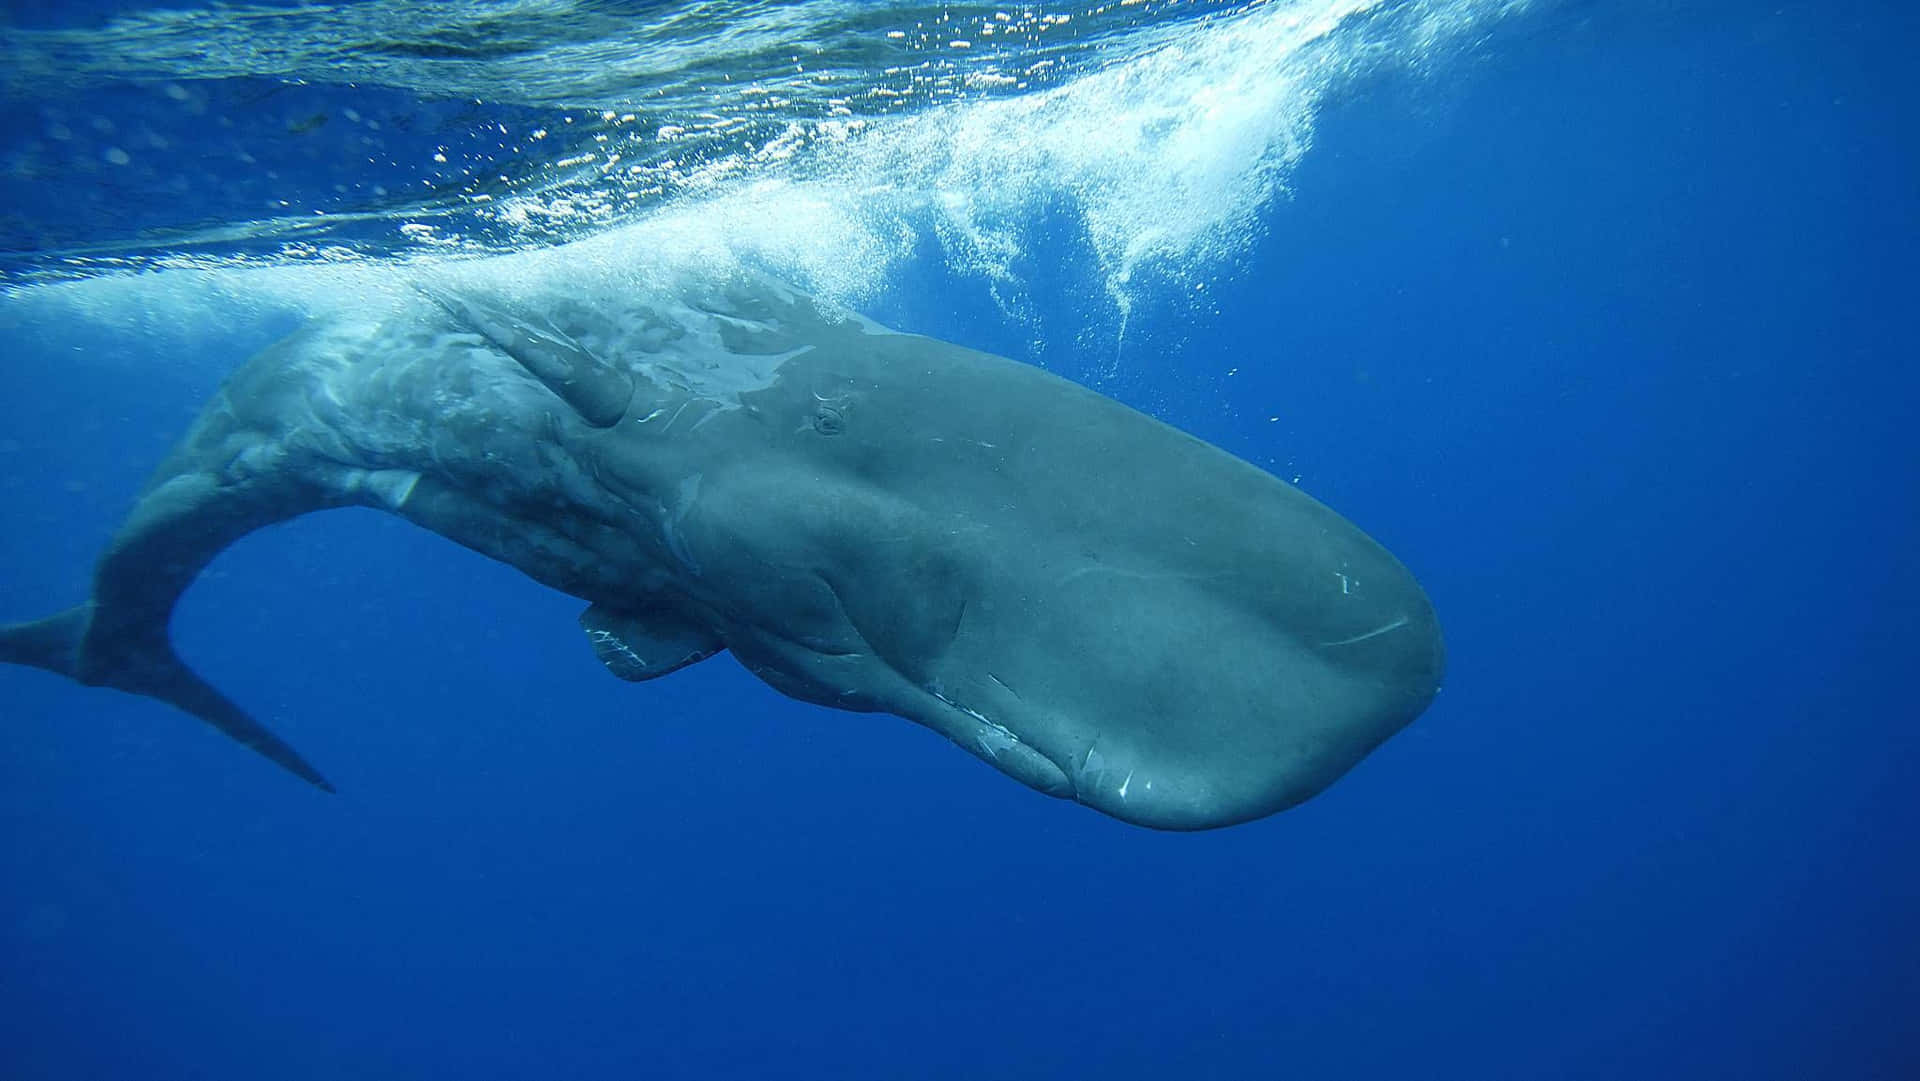 "A majestic Sperm Whale surfaces in the open ocean"